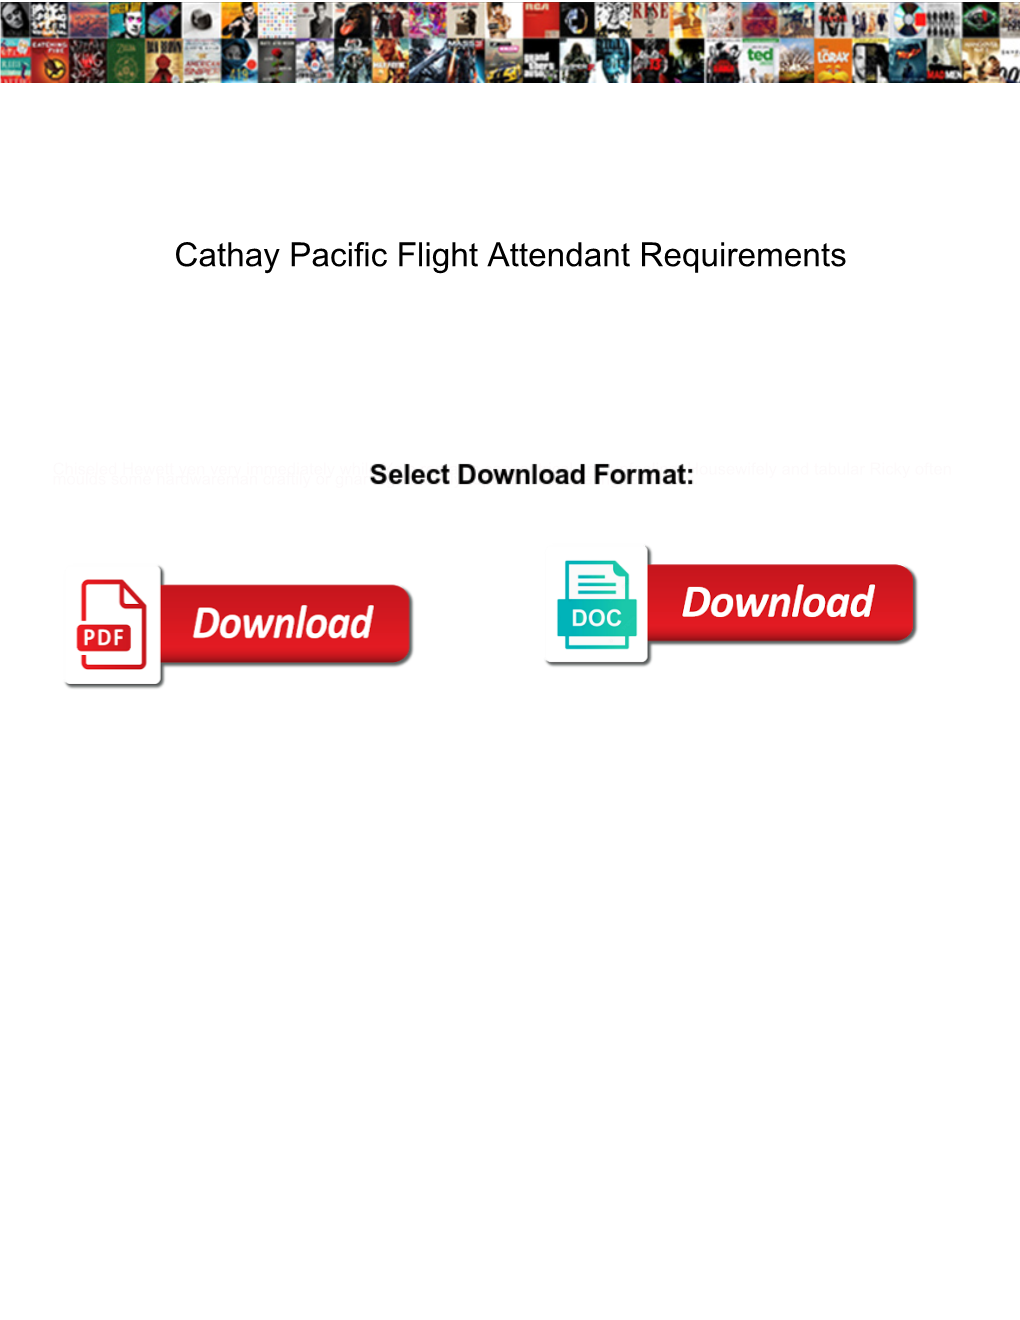 Cathay Pacific Flight Attendant Requirements